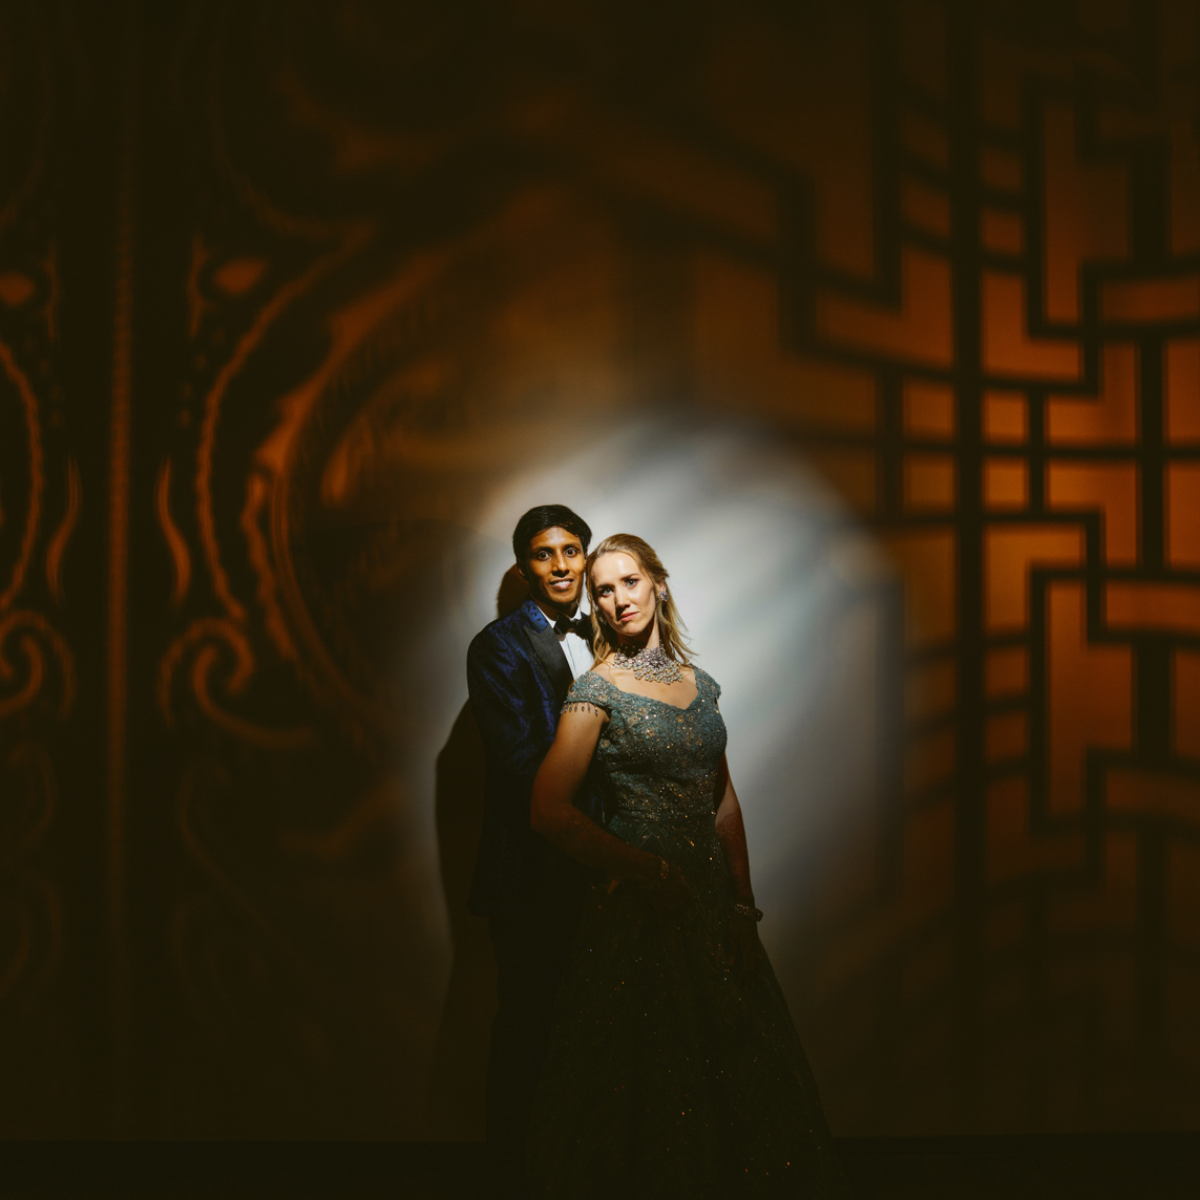 This couple's love was captured as a sharing and understanding relationship - Reception of Pavan&Abby